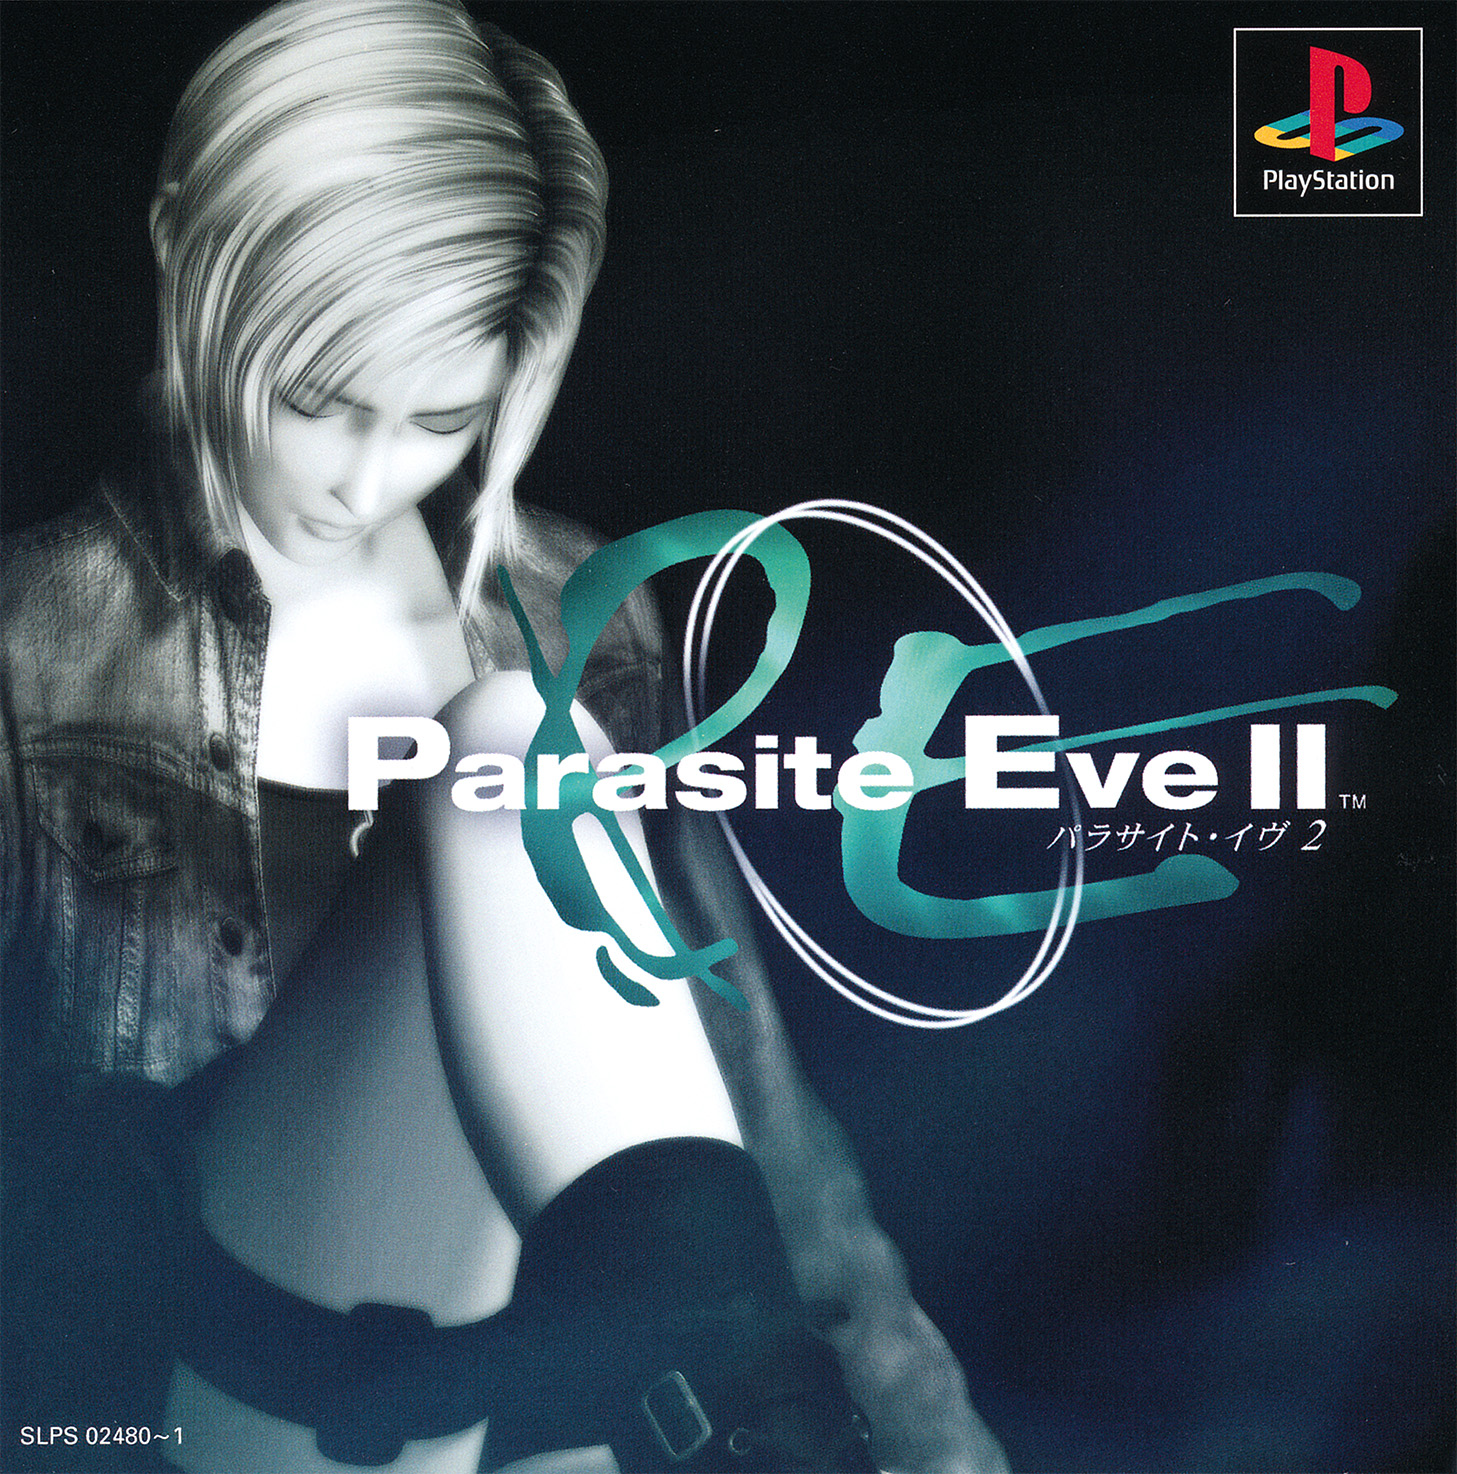 parasite-eve-ii-ps1-slps-02480-1-ntsc-j-complete-art-scans-free-download-borrow-and